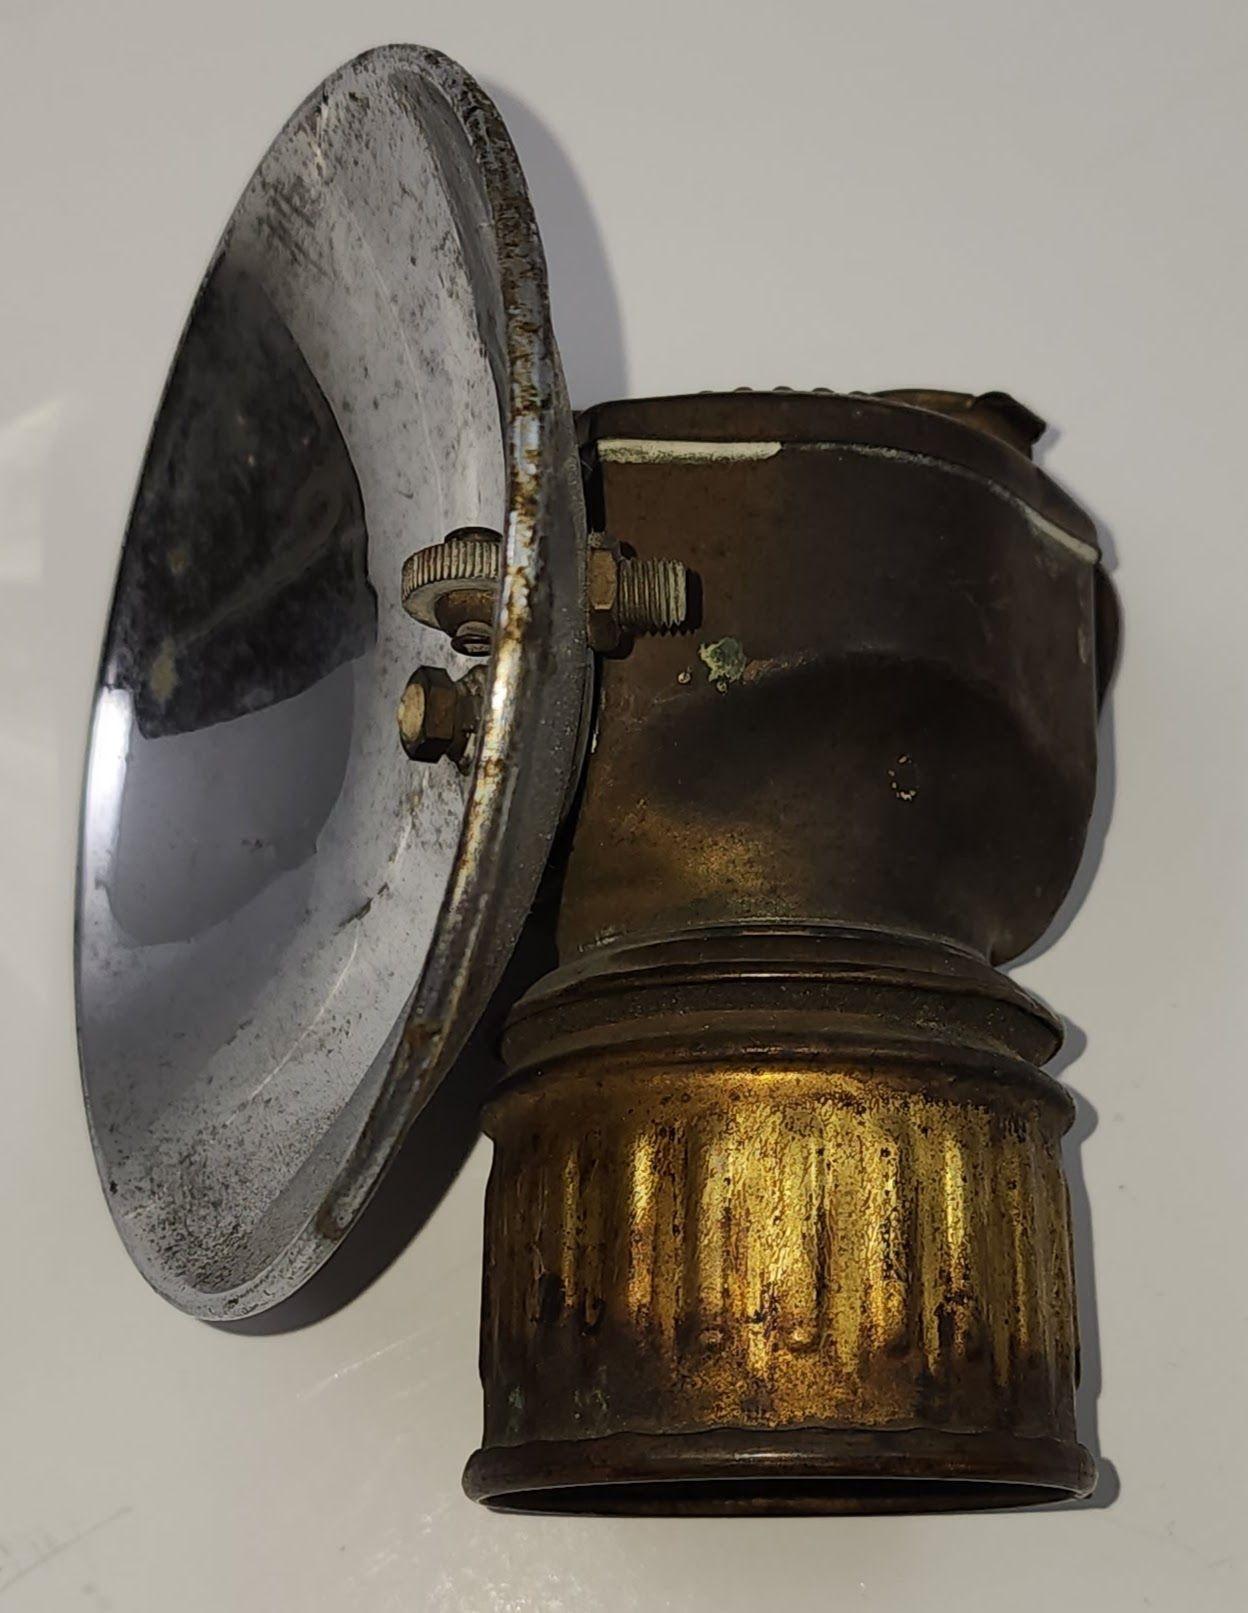 Rustic Carbide Coal Miners Lamp with Coal Oil Can and tin funnel by Justrite Areamlined For Sale